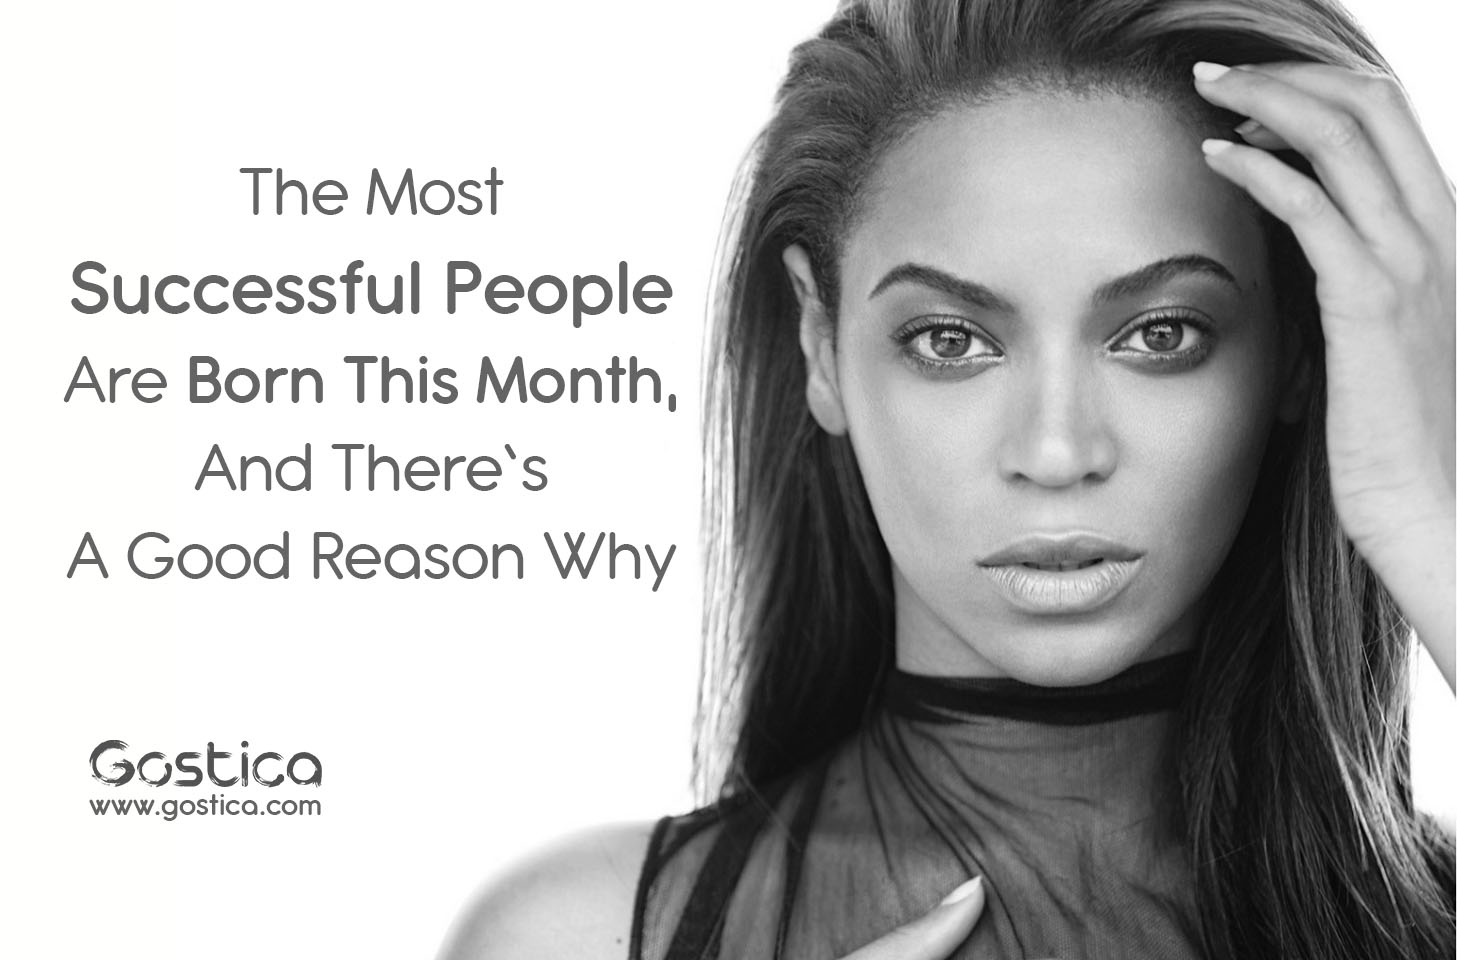 The-Most-Successful-People-Are-Born-This-Month-And-There’s-A-Good-Reason-Why.jpg